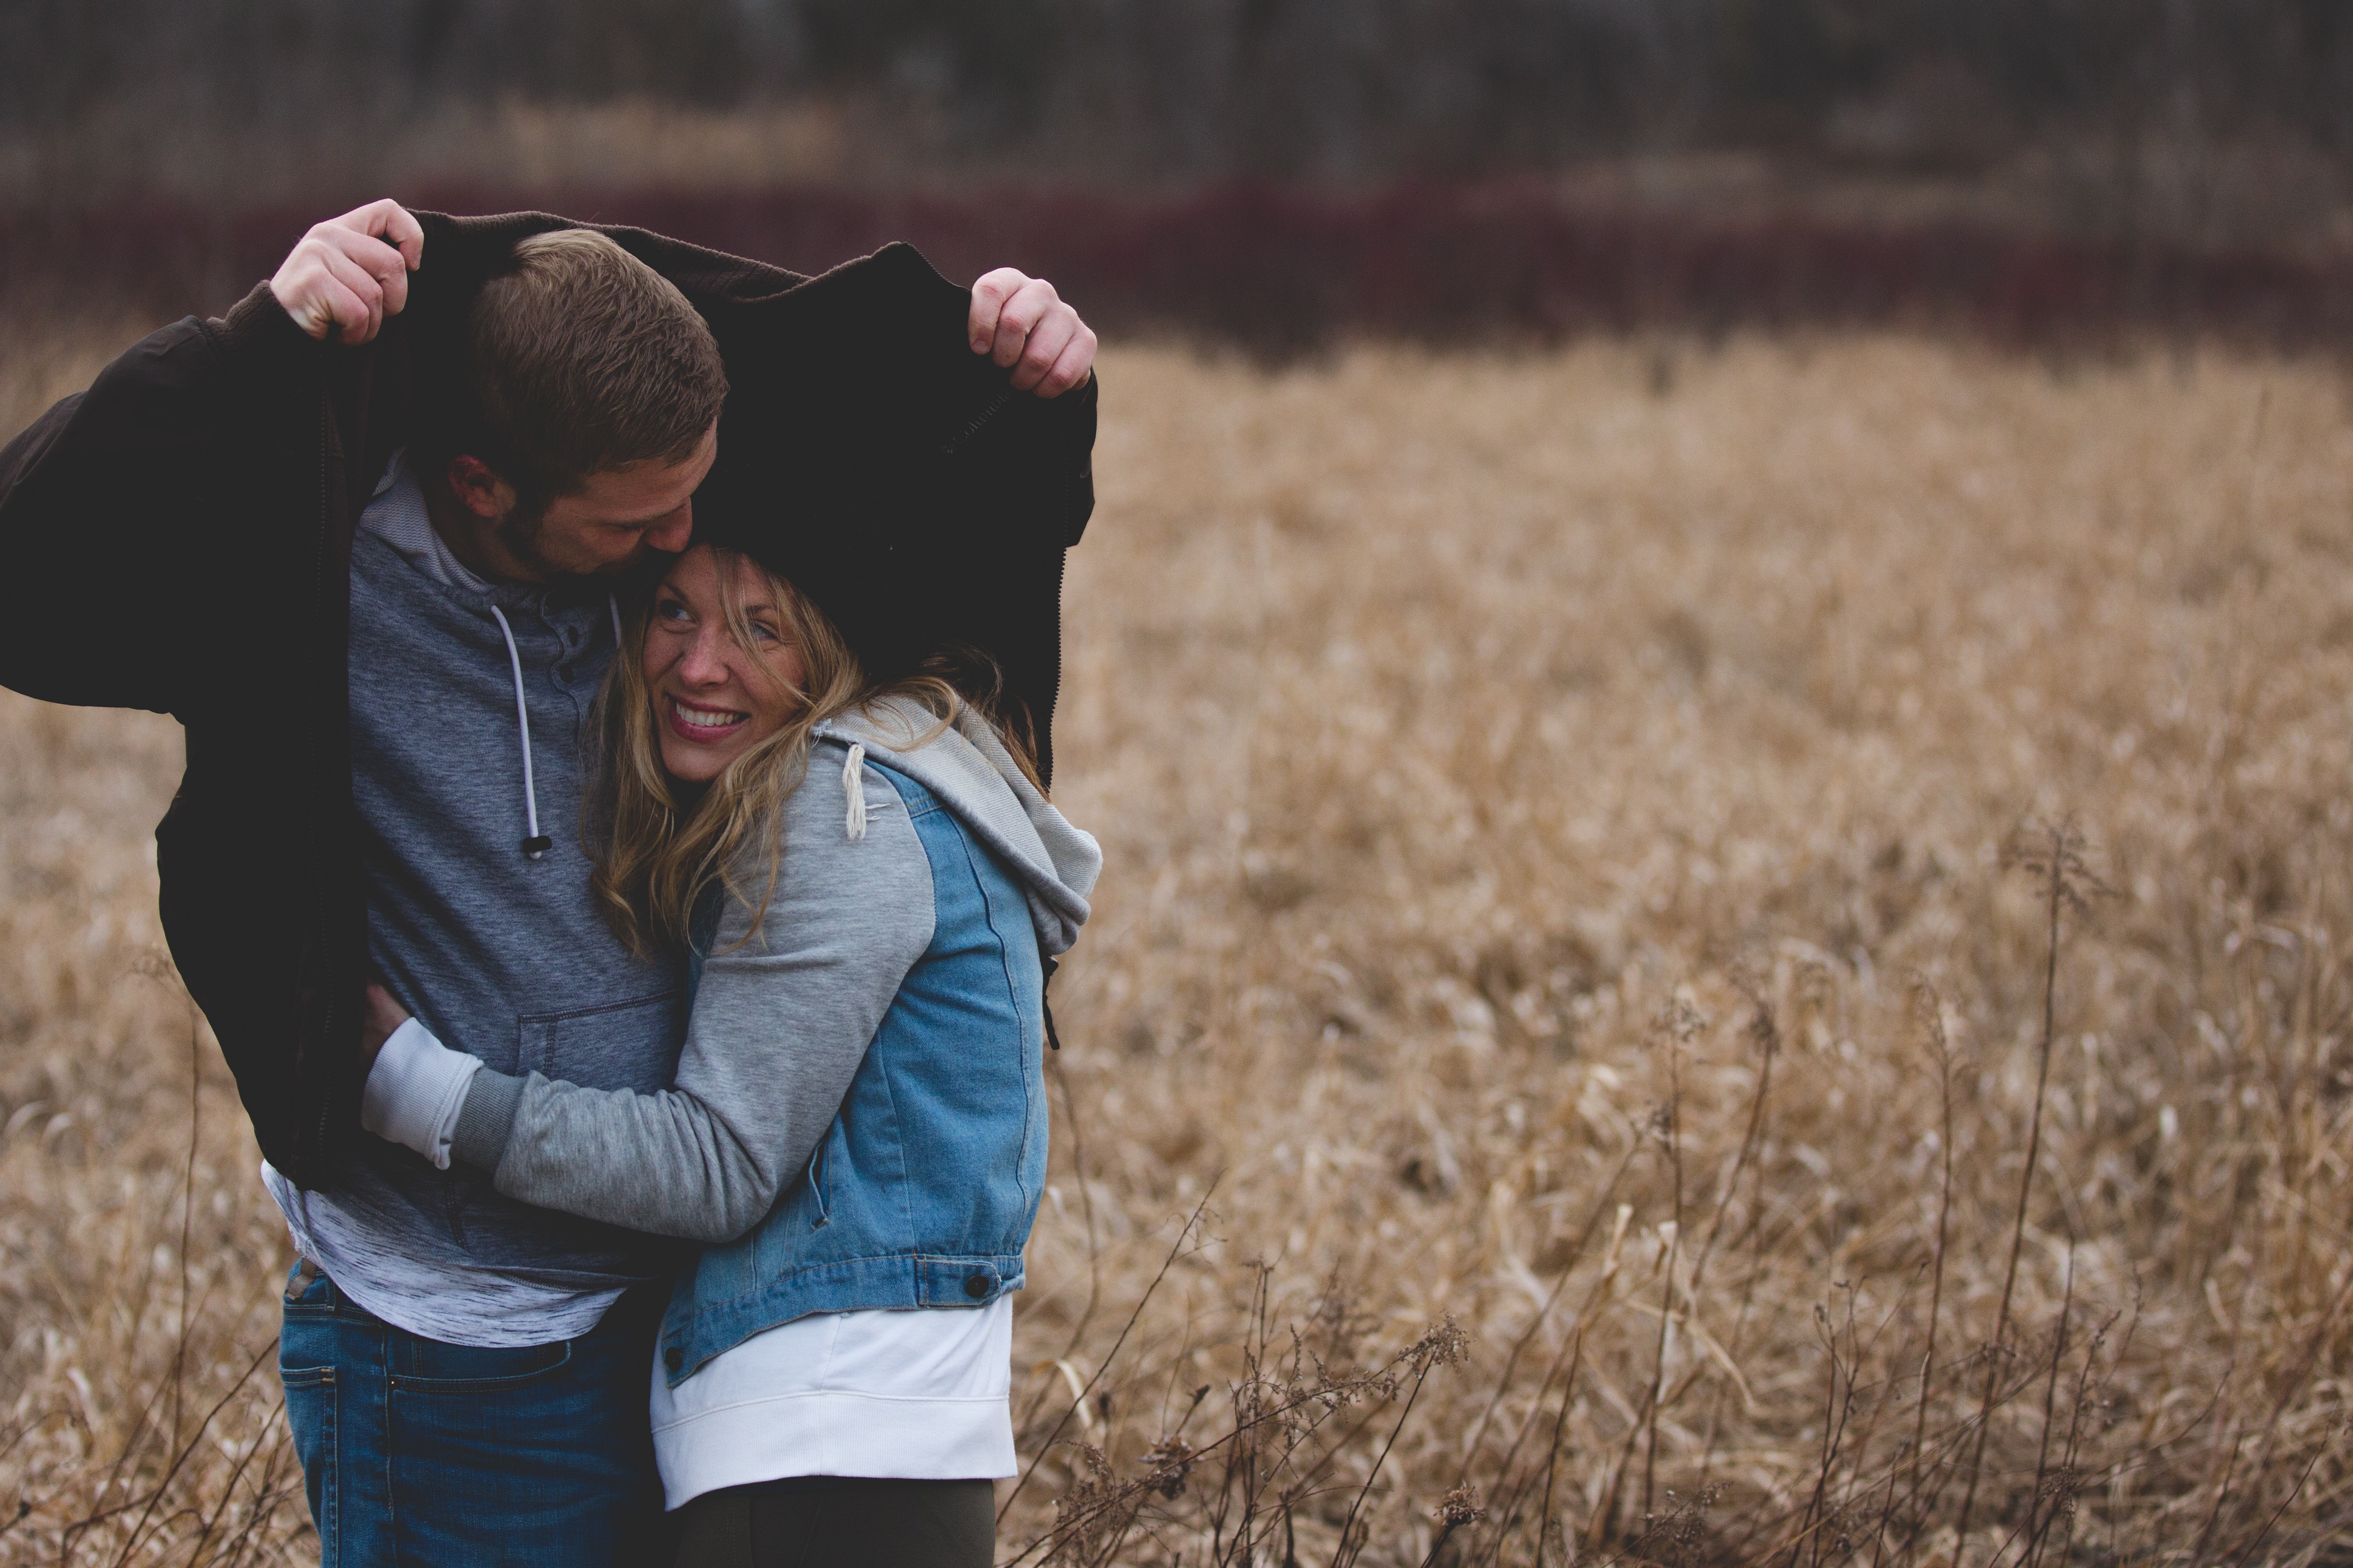 A couple embracing each other. | Source: Pexels